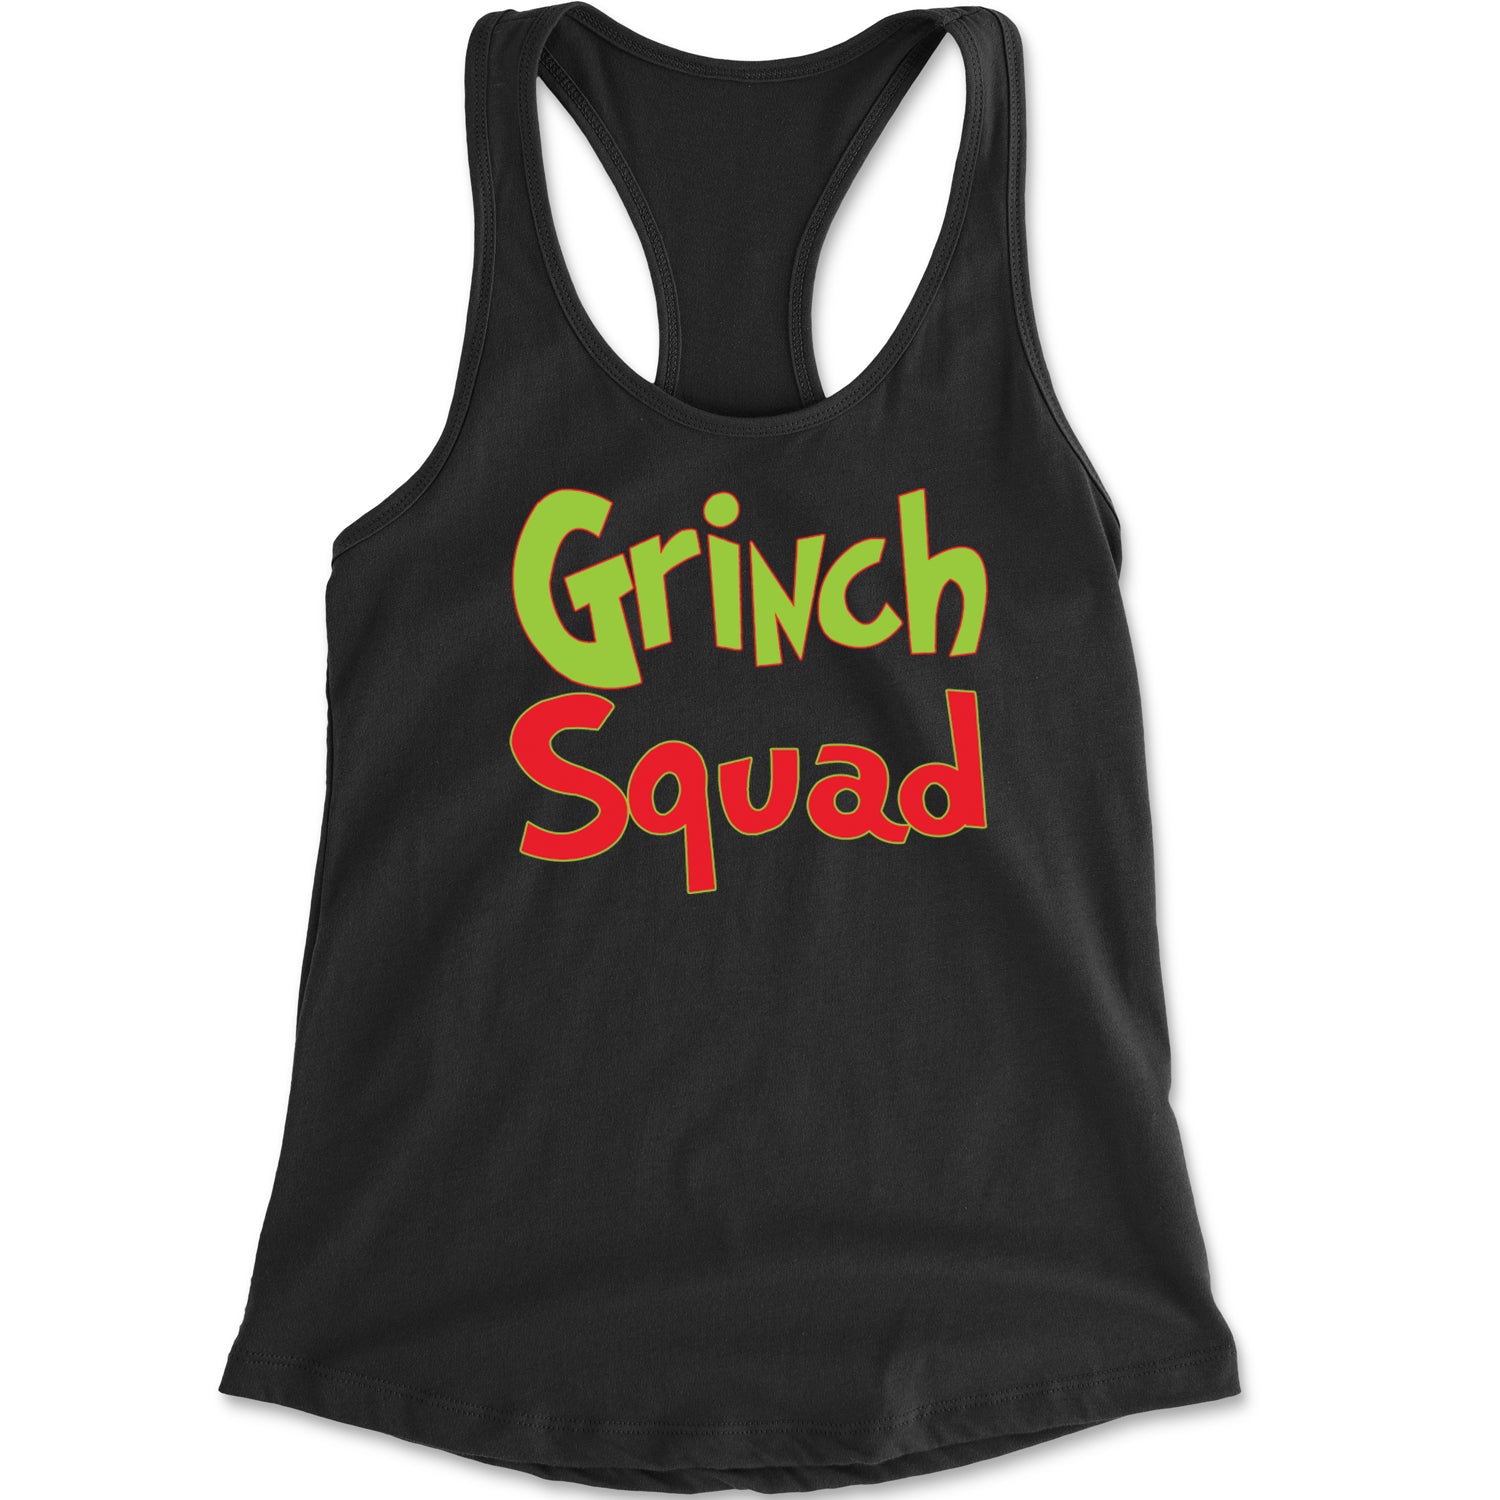 Gr-nch Squad Jolly Grinchmas Merry Christmas Racerback Tank Top for Women